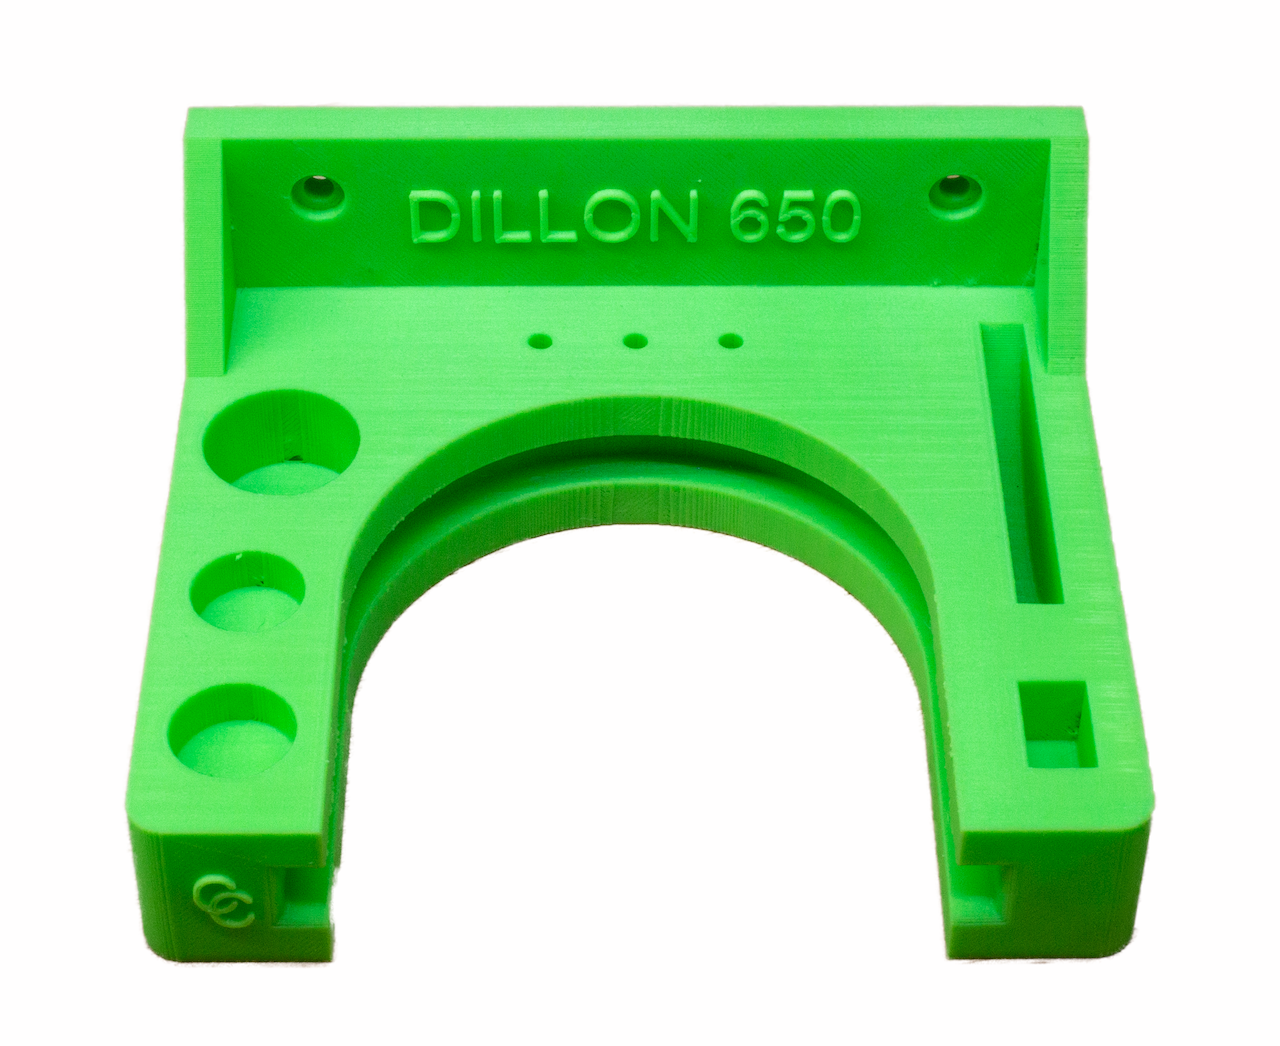 Dillon 650 and 750 Toolhead Holder wall mount